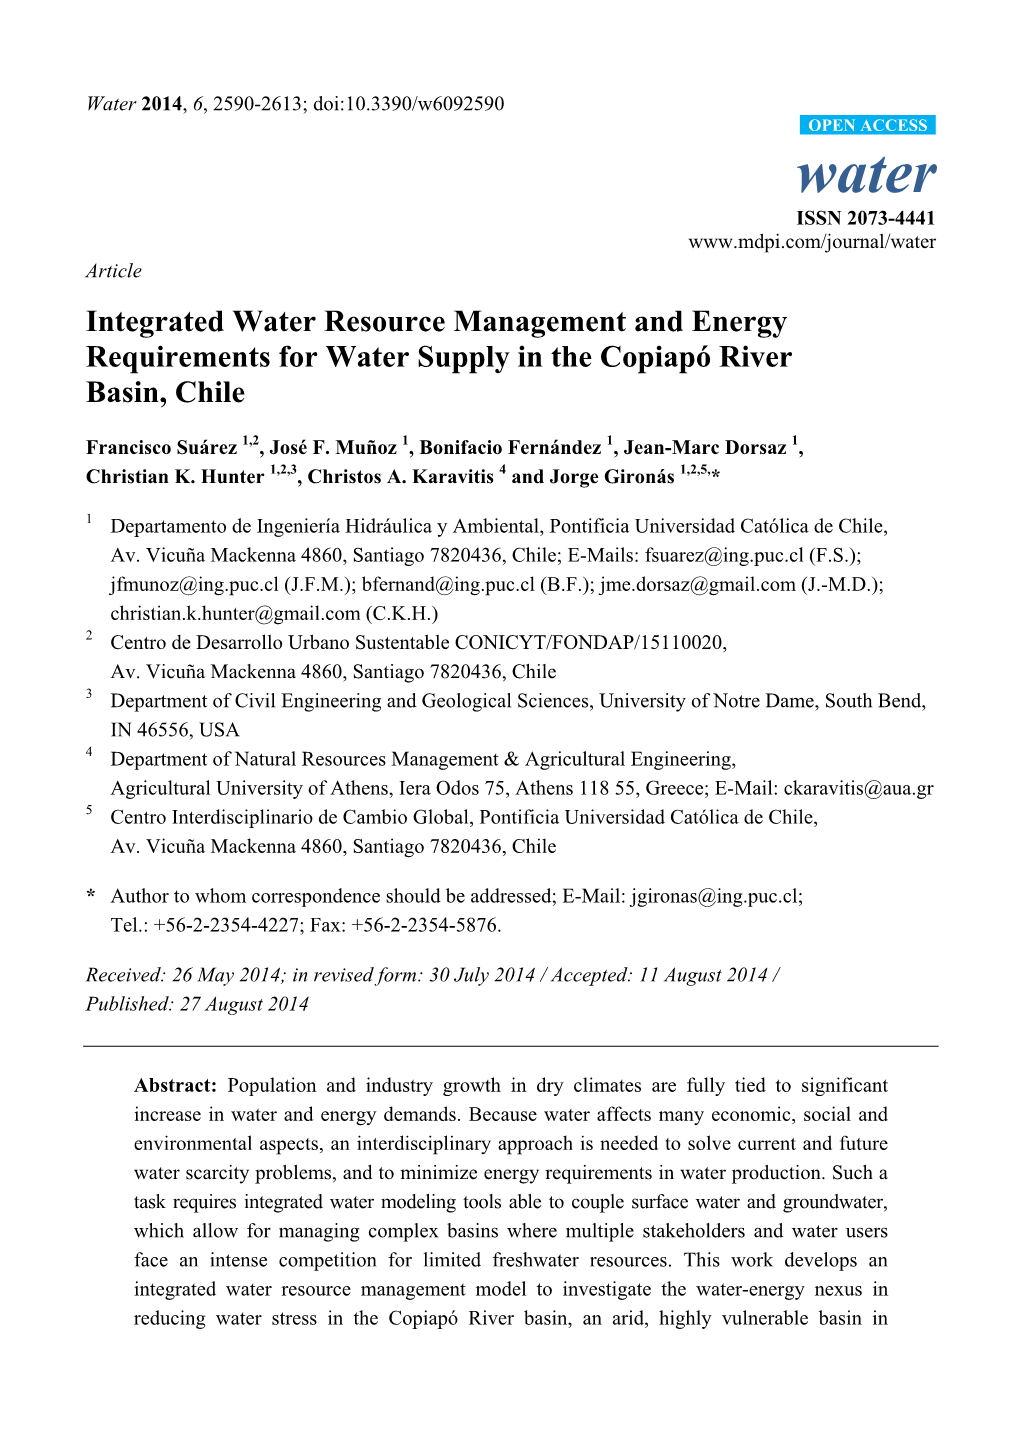 Integrated Water Resource Management and Energy Requirements for Water Supply in the Copiapó River Basin, Chile